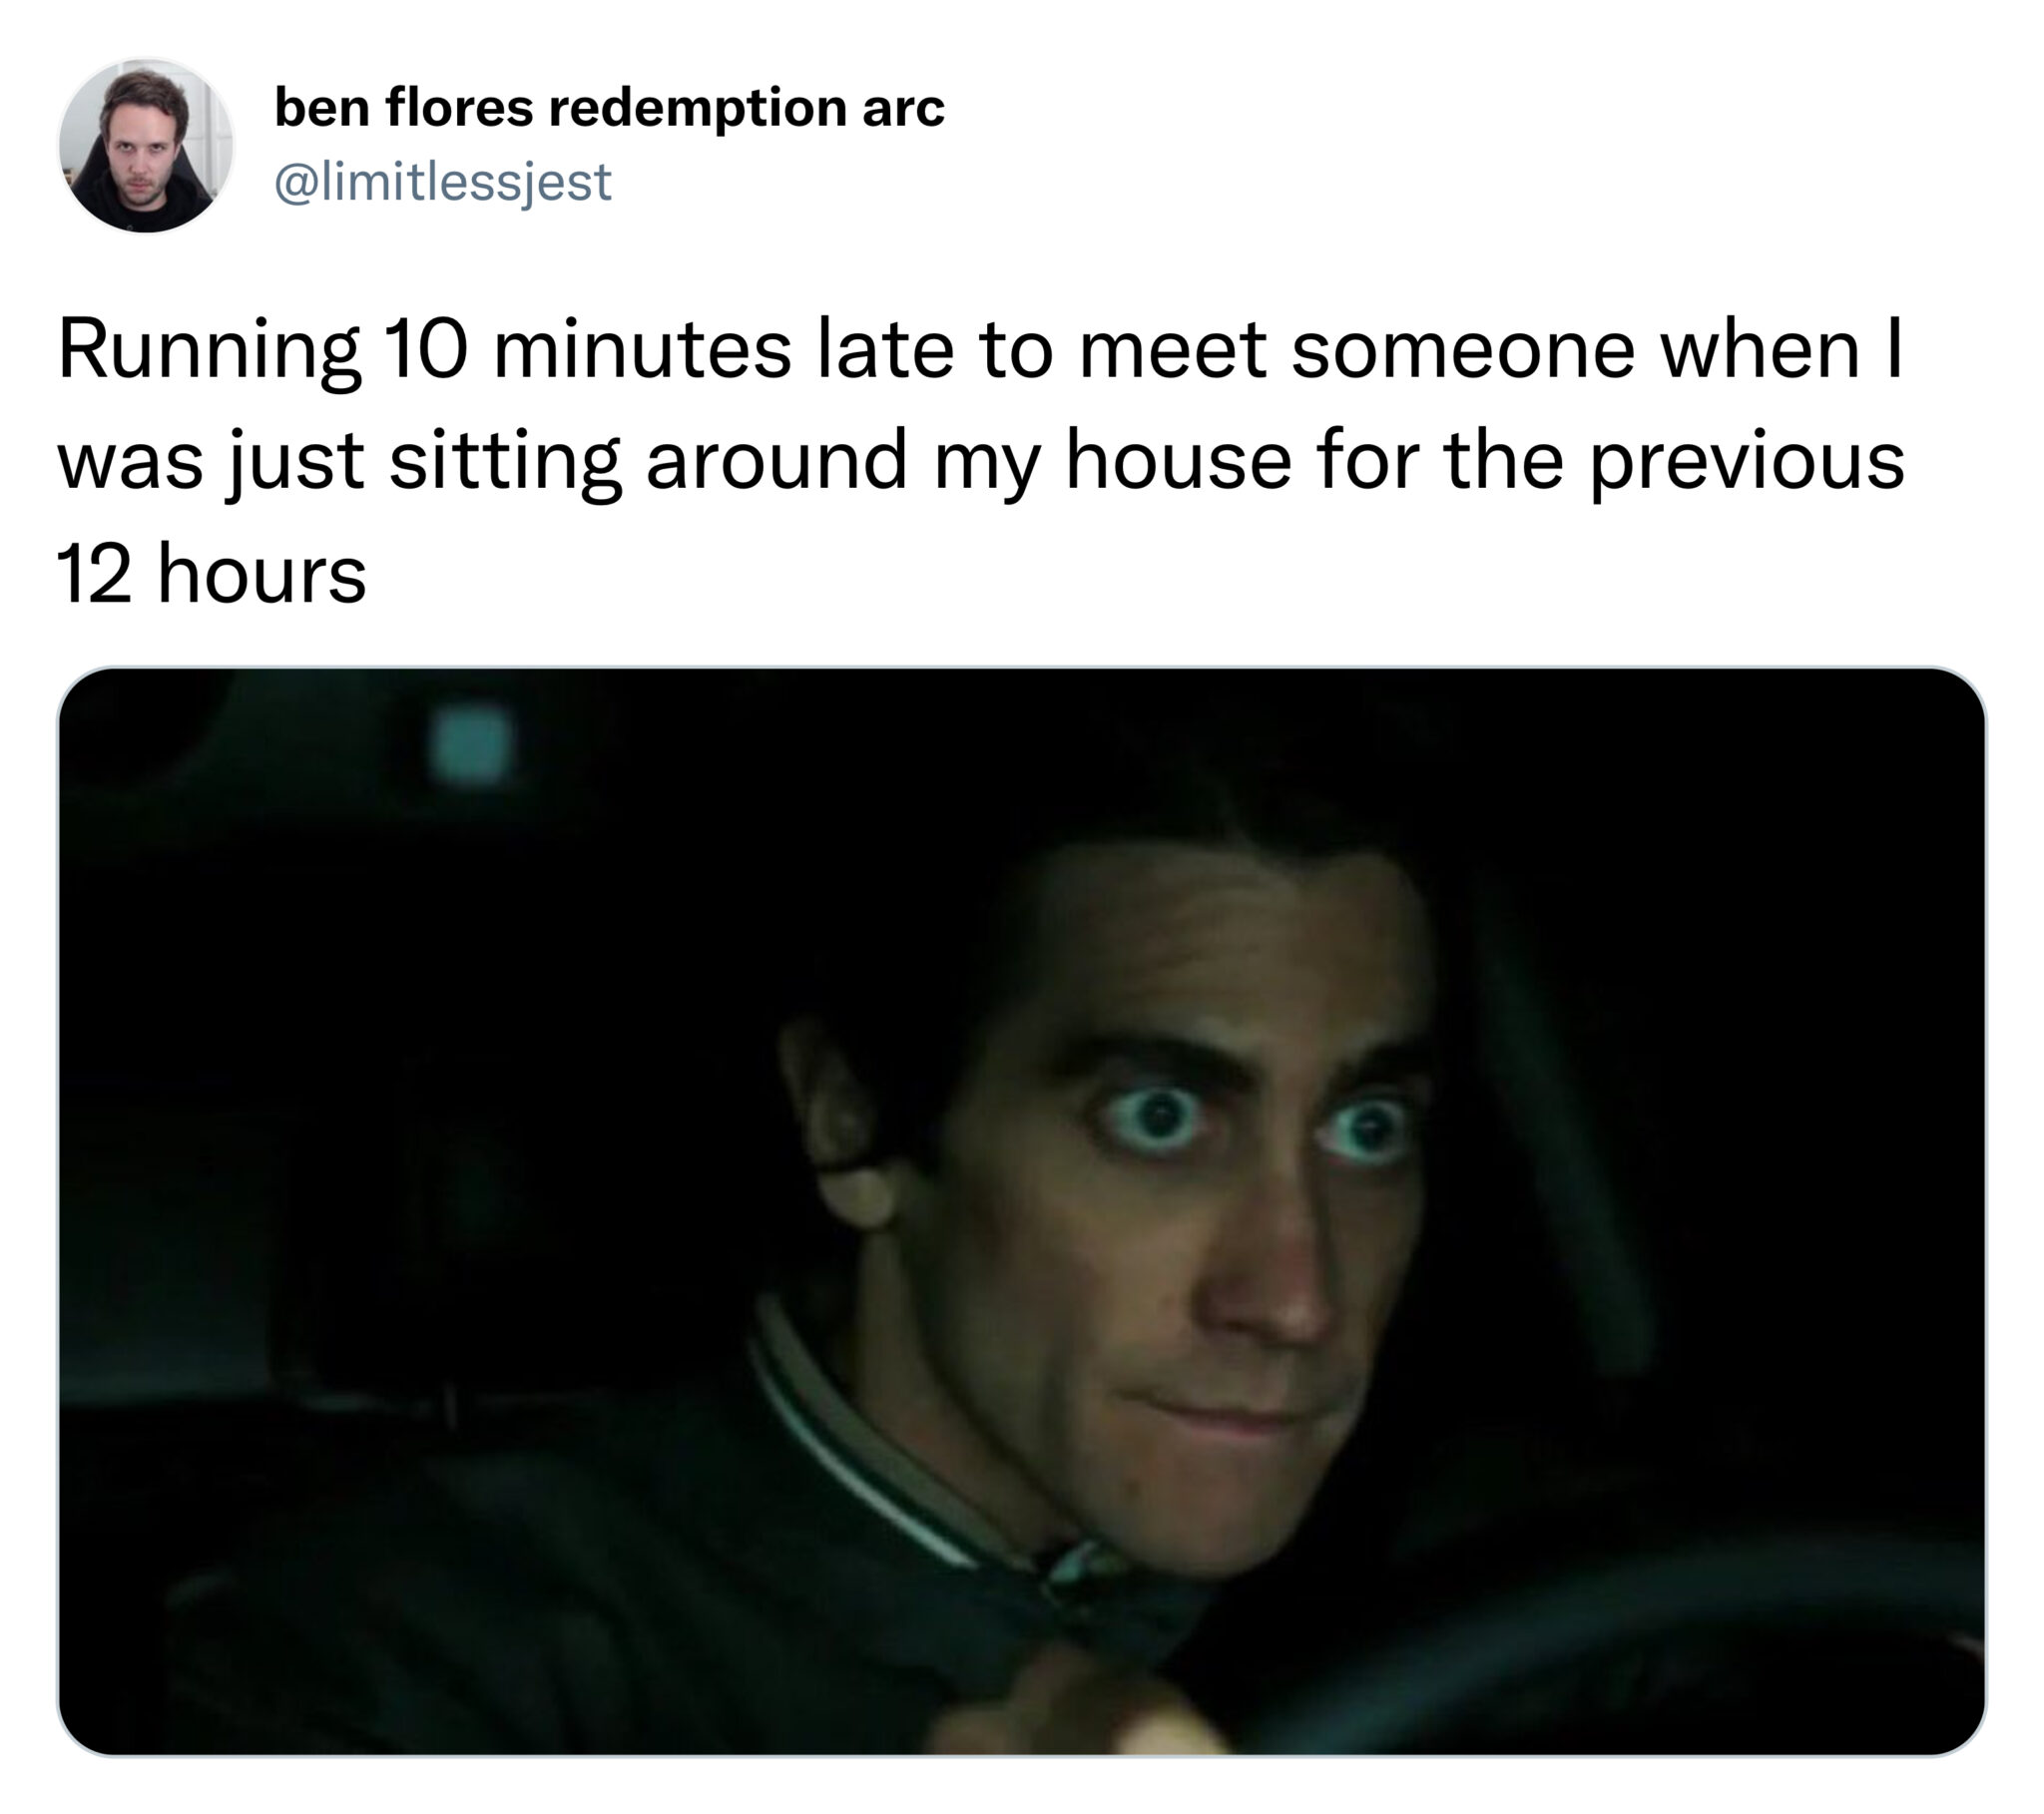 Monday Morning Randomness - photo caption - ben flores redemption arc Running 10 minutes late to meet someone when I was just sitting around my house for the previous 12 hours